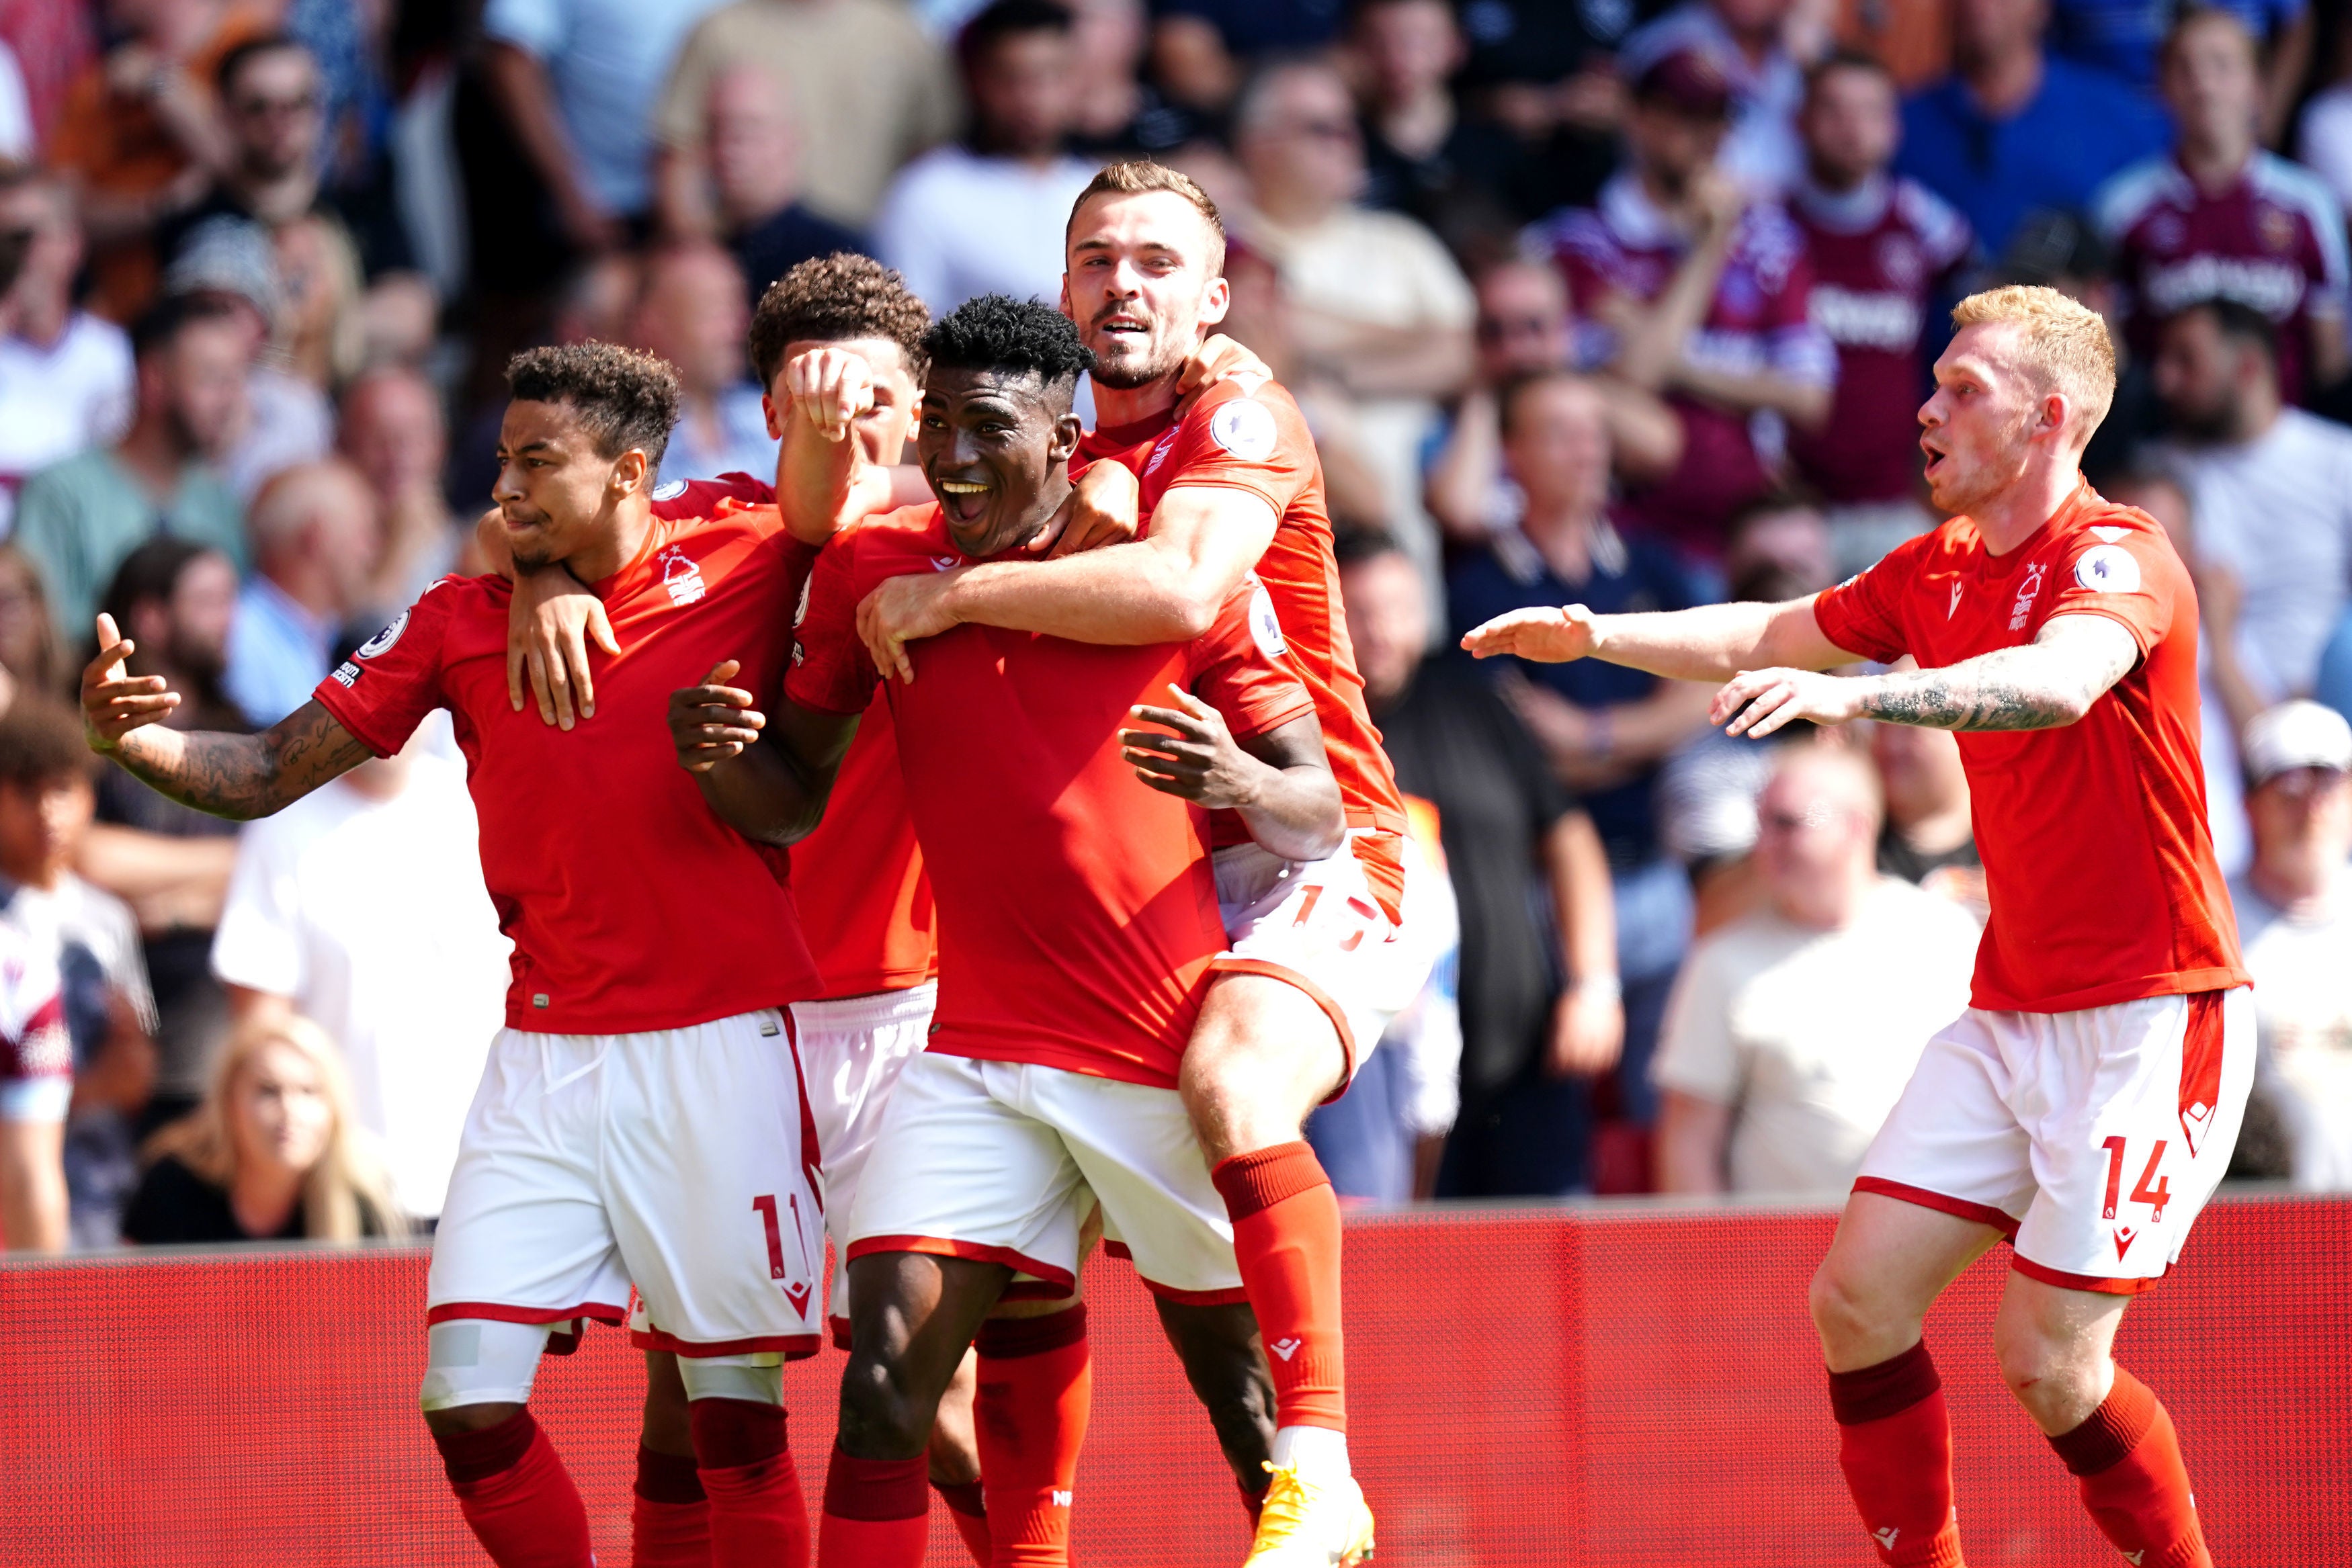 Nottingham Forest v West Ham LIVE Premier League result, final score and reaction as Forest seal memorable win at the City Ground The Independent